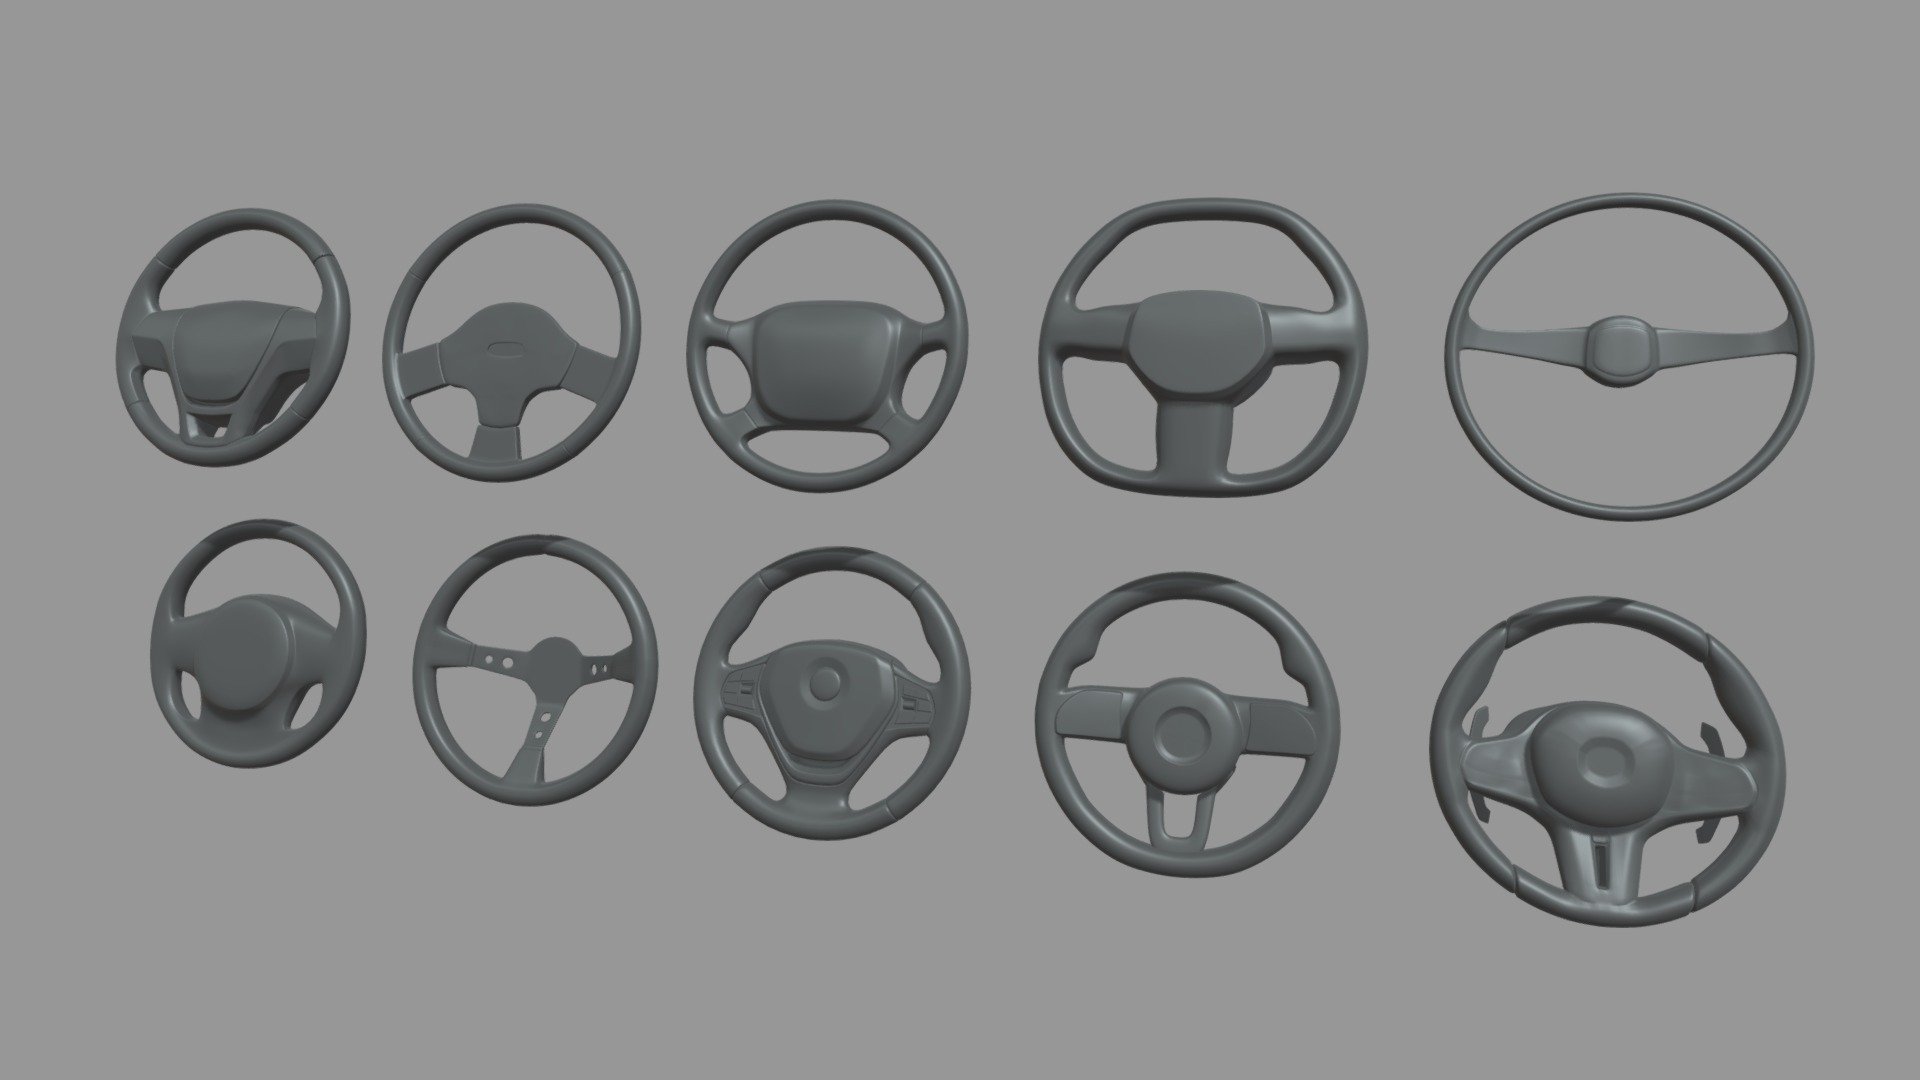 This model contains an Steering Wheel Car Pack 01 based on real stylized steering wheels from real cars which i modeled in Maya 2018.This model is perfect to create a new great scene with different car pieces or part of a car model.

These models are available for 3D printing, the STL is added and work correctly in Ultimaker Cura. If you have any problem contact me. The model is added in .fbx, .obj, .stl, .blend and .mb

These models are available in fbx, obj and stl individually so you can print or use them individually and as a group.

If you need any kind of help contact me, i will help you with everything i can. If you like the model please give me some feedback, I would appreciate it.

Don’t doubt on contacting me, i would be very happy to help. If you experience any kind of difficulties, be sure to contact me and i will help you. Sincerely Yours, ViperJr3D - Steering Wheel Car Pack 01 - Buy Royalty Free 3D model by ViperJr3D 3d model